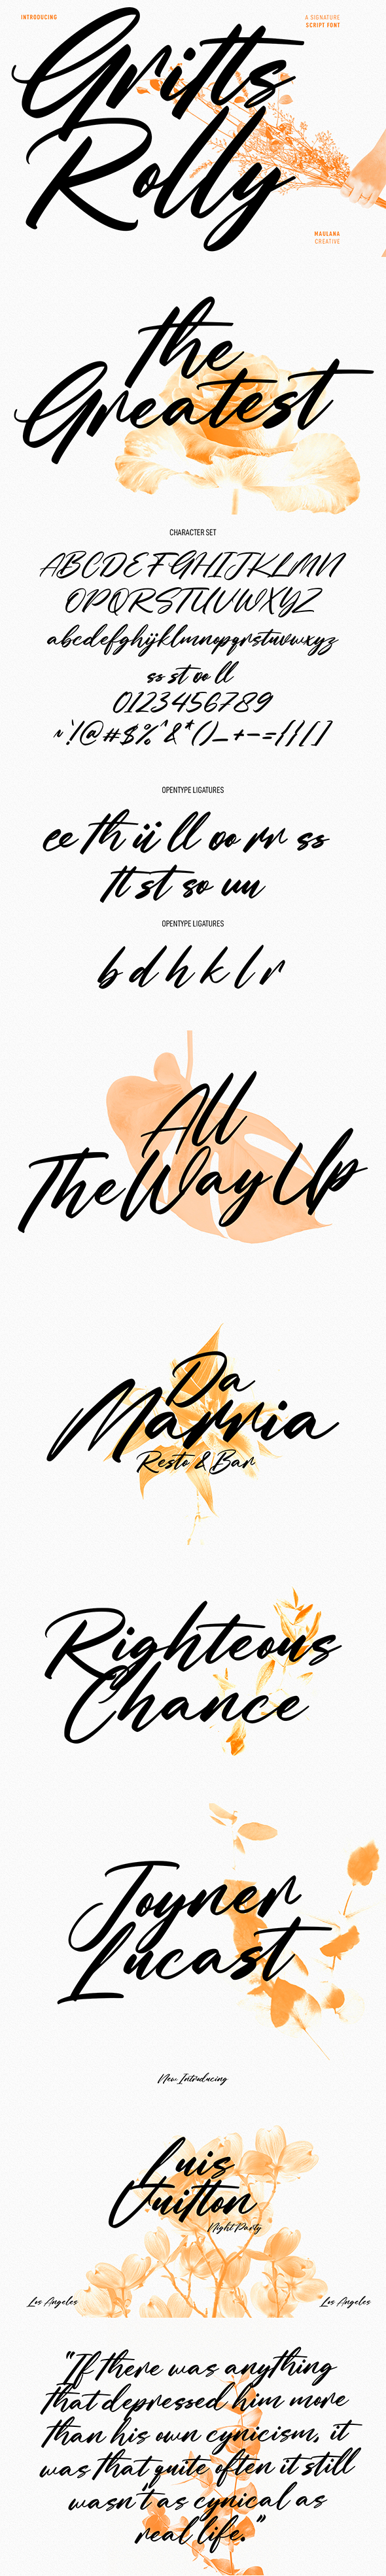 Gritts Rolly Script Font